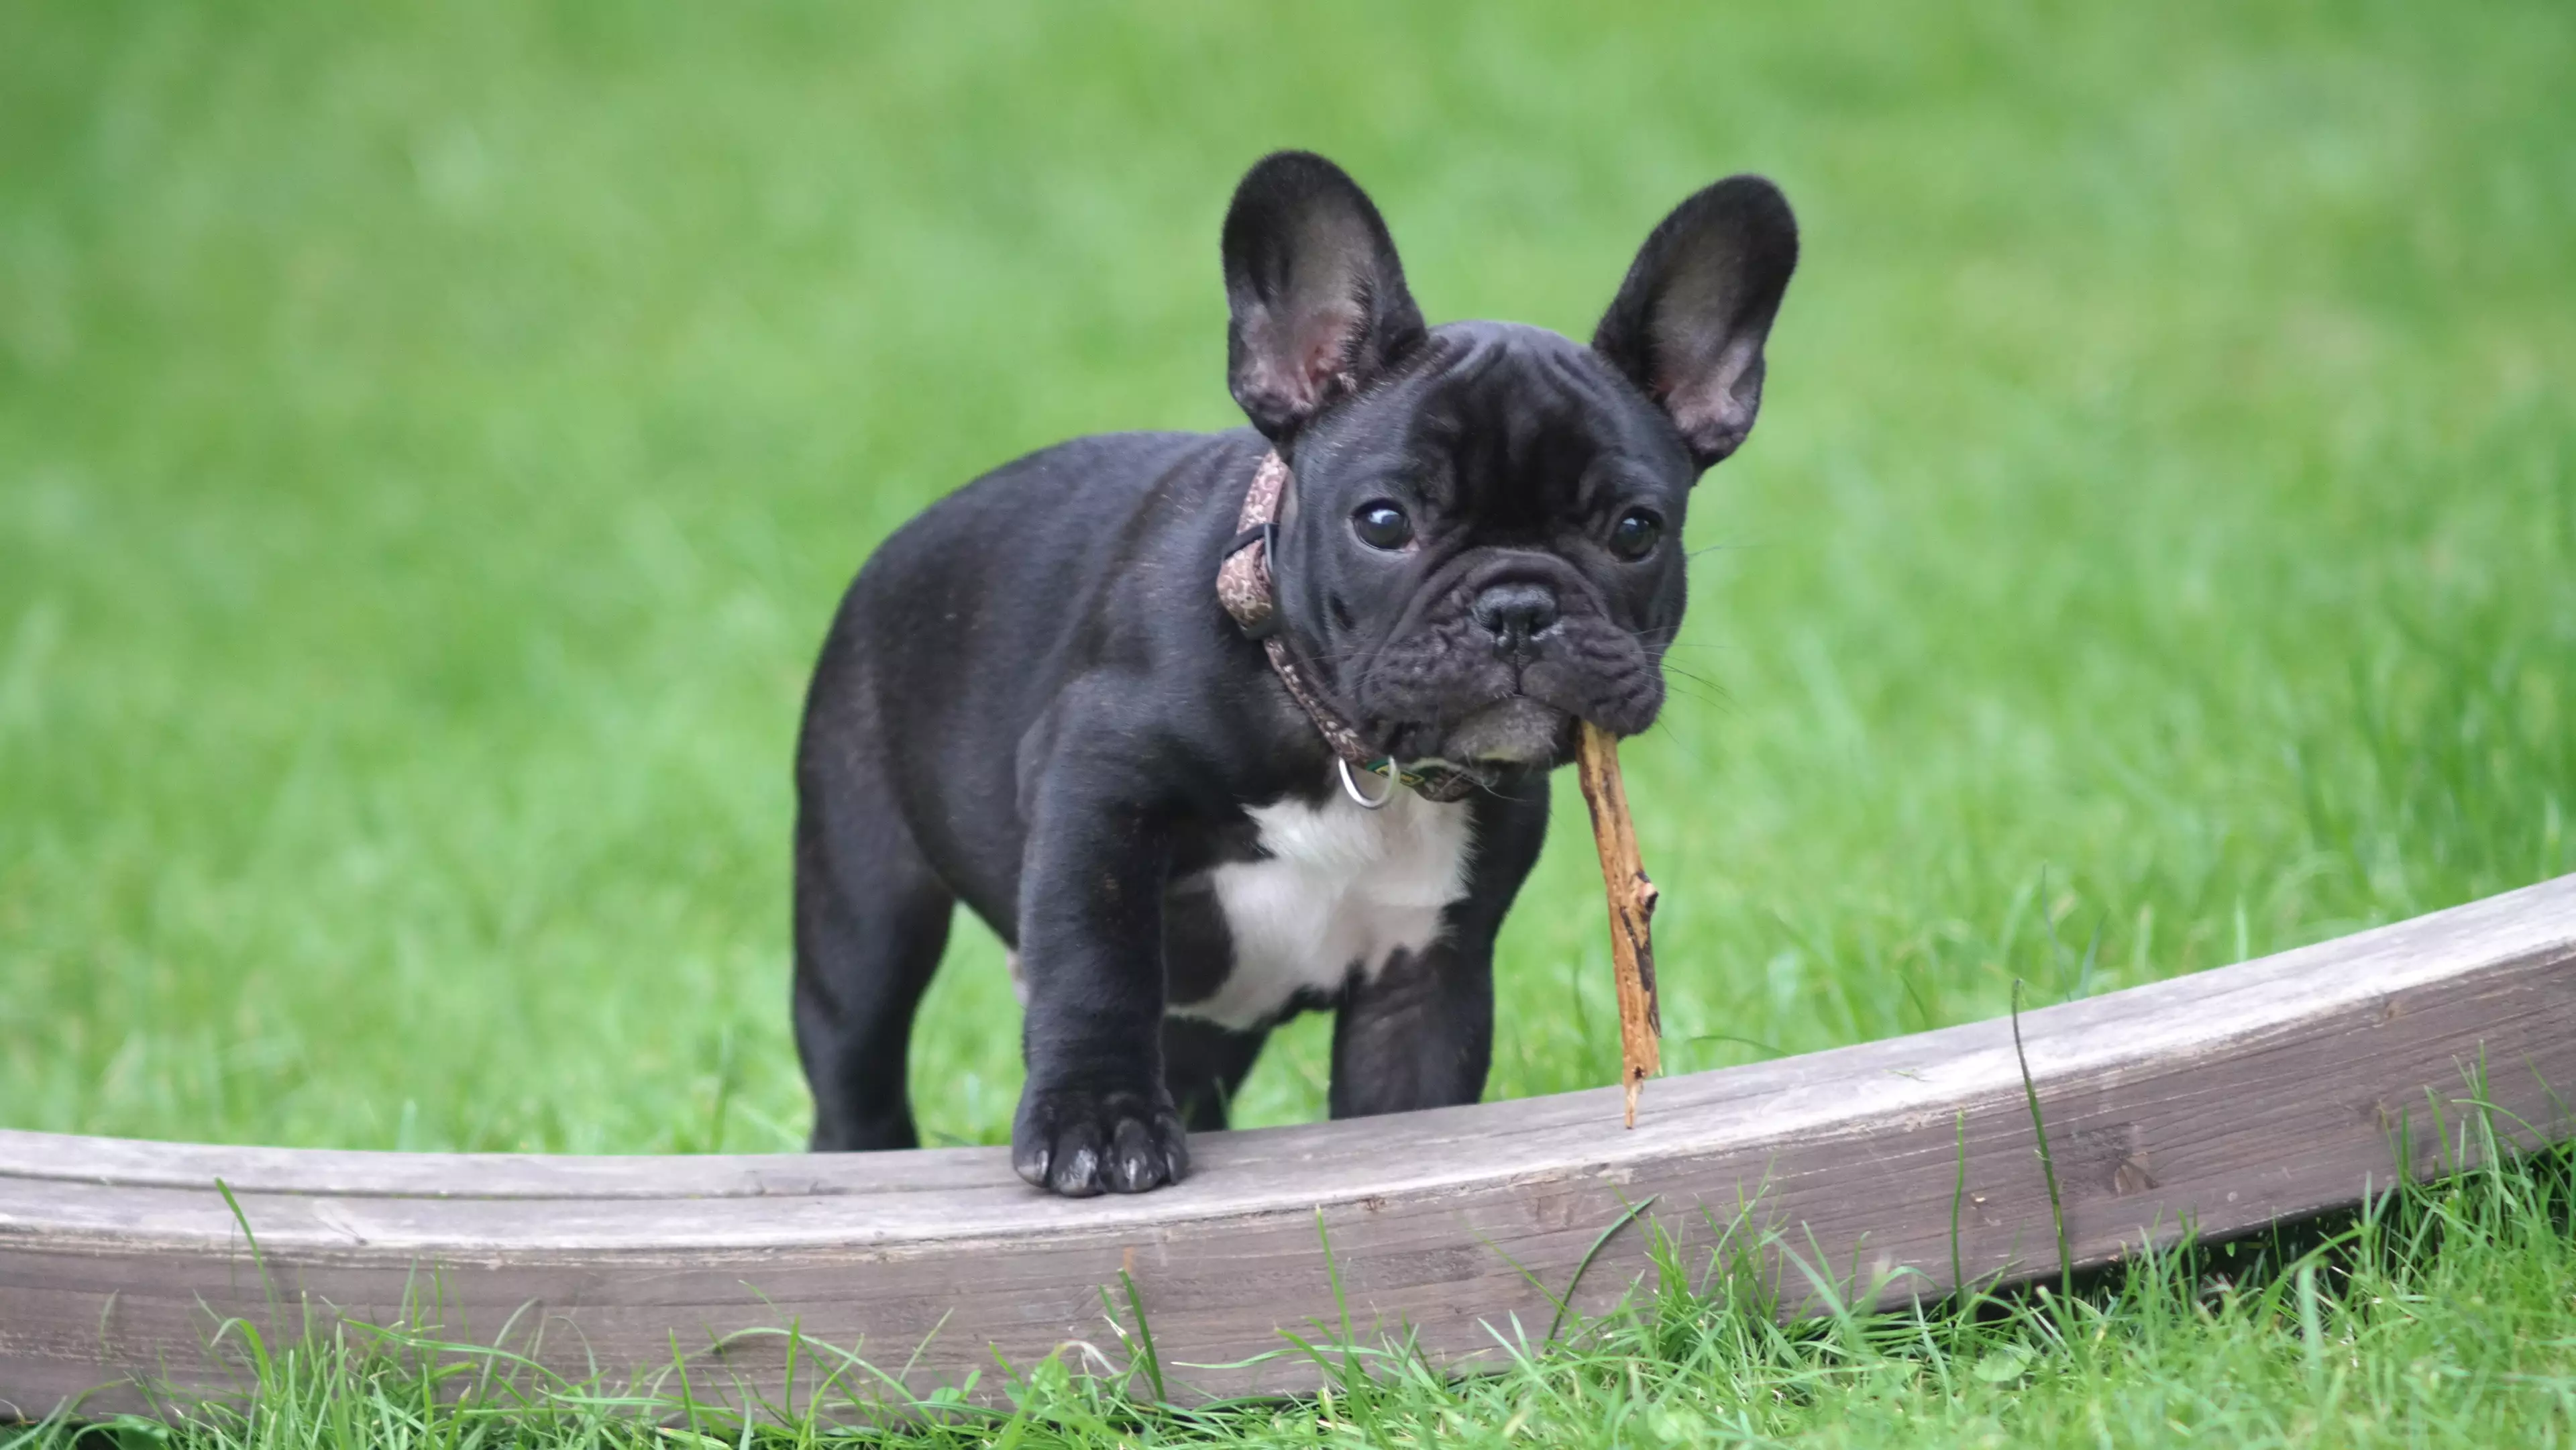 The rise in dog thefts is believed to be driven by the high demand for puppies which has lead to a surge in prices (